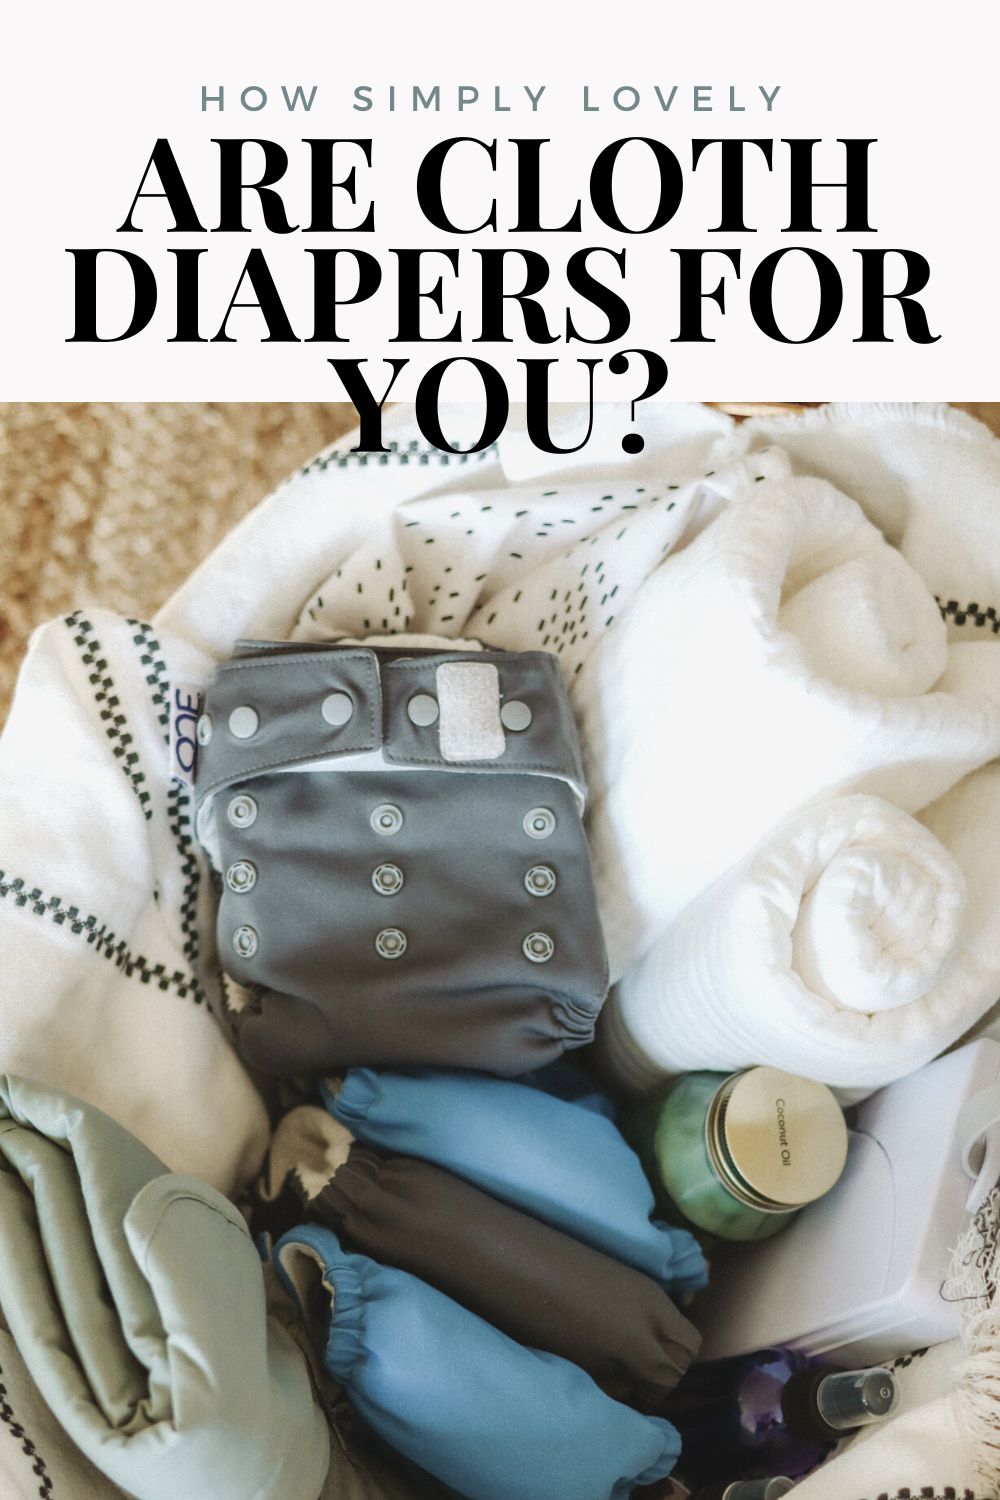 Baby changing basket with cloth diapers, portable changing pad, muslin blankets, baby wipe case, and wet bag. Writing that says: are cloth diapers for you?